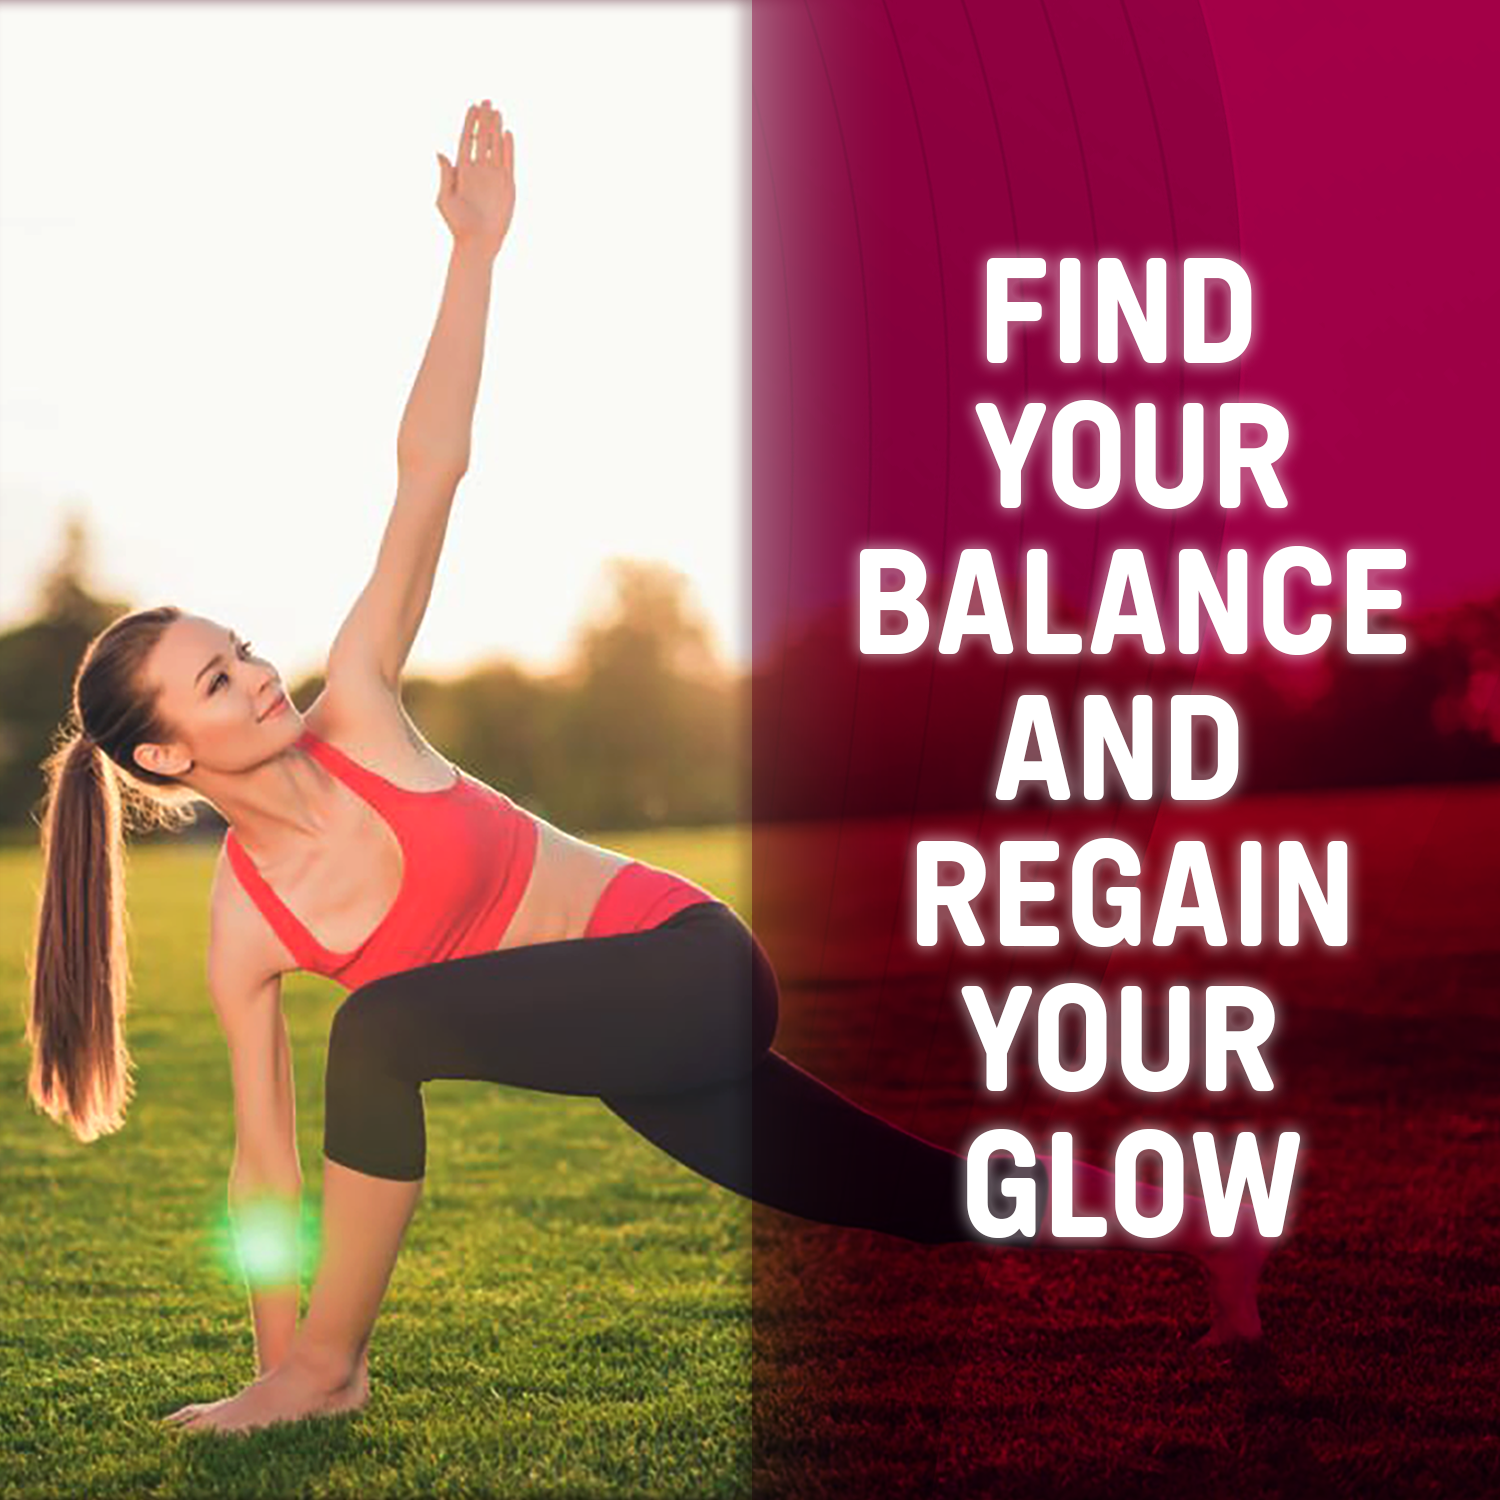 Find your balance and regain your glow